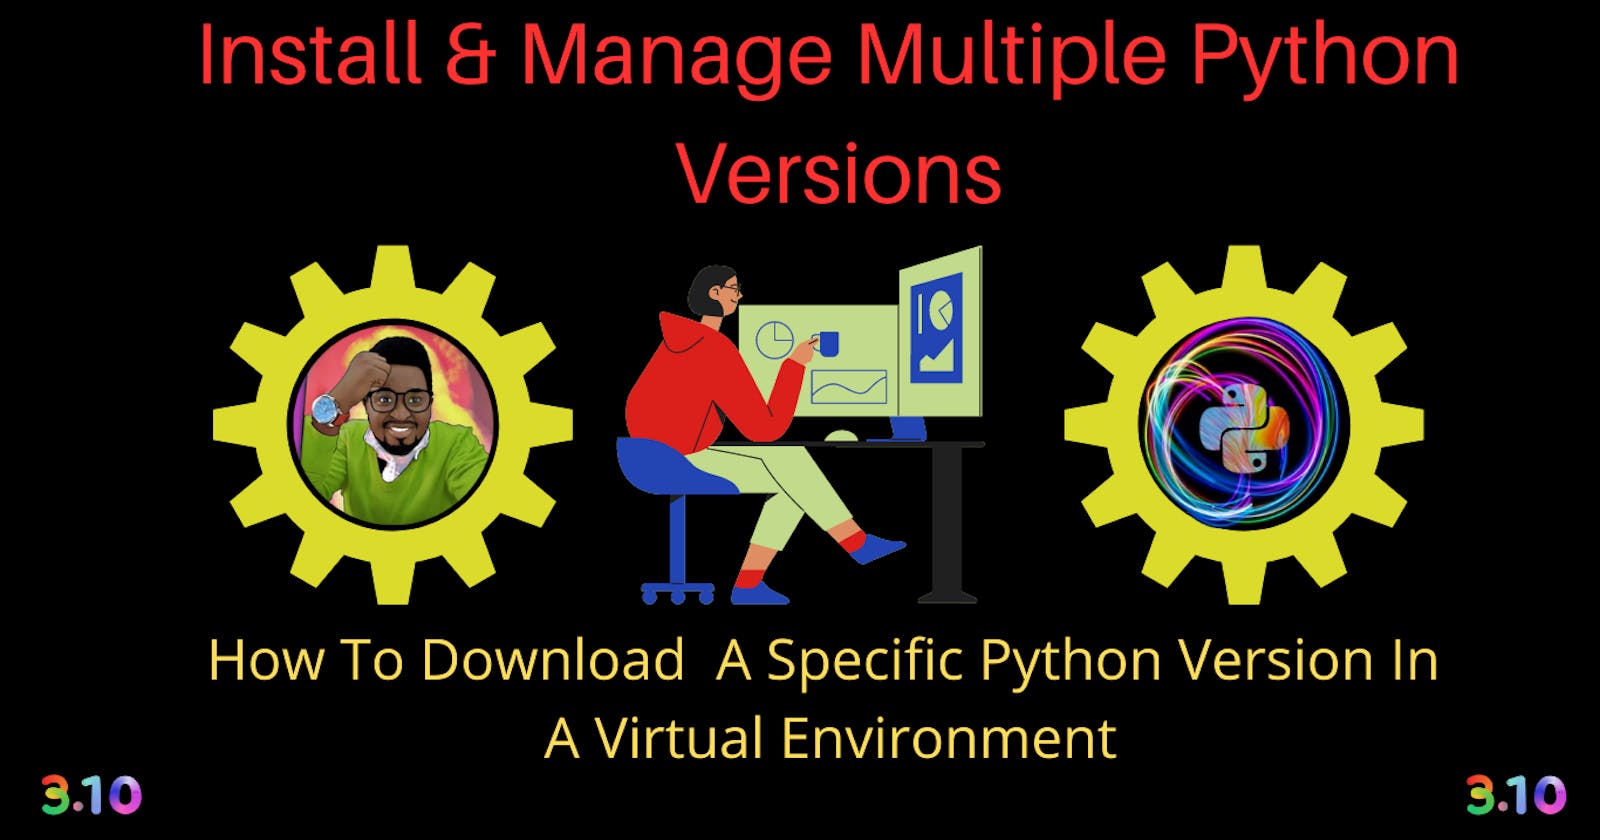 Install & Manage Multiple Python Versions